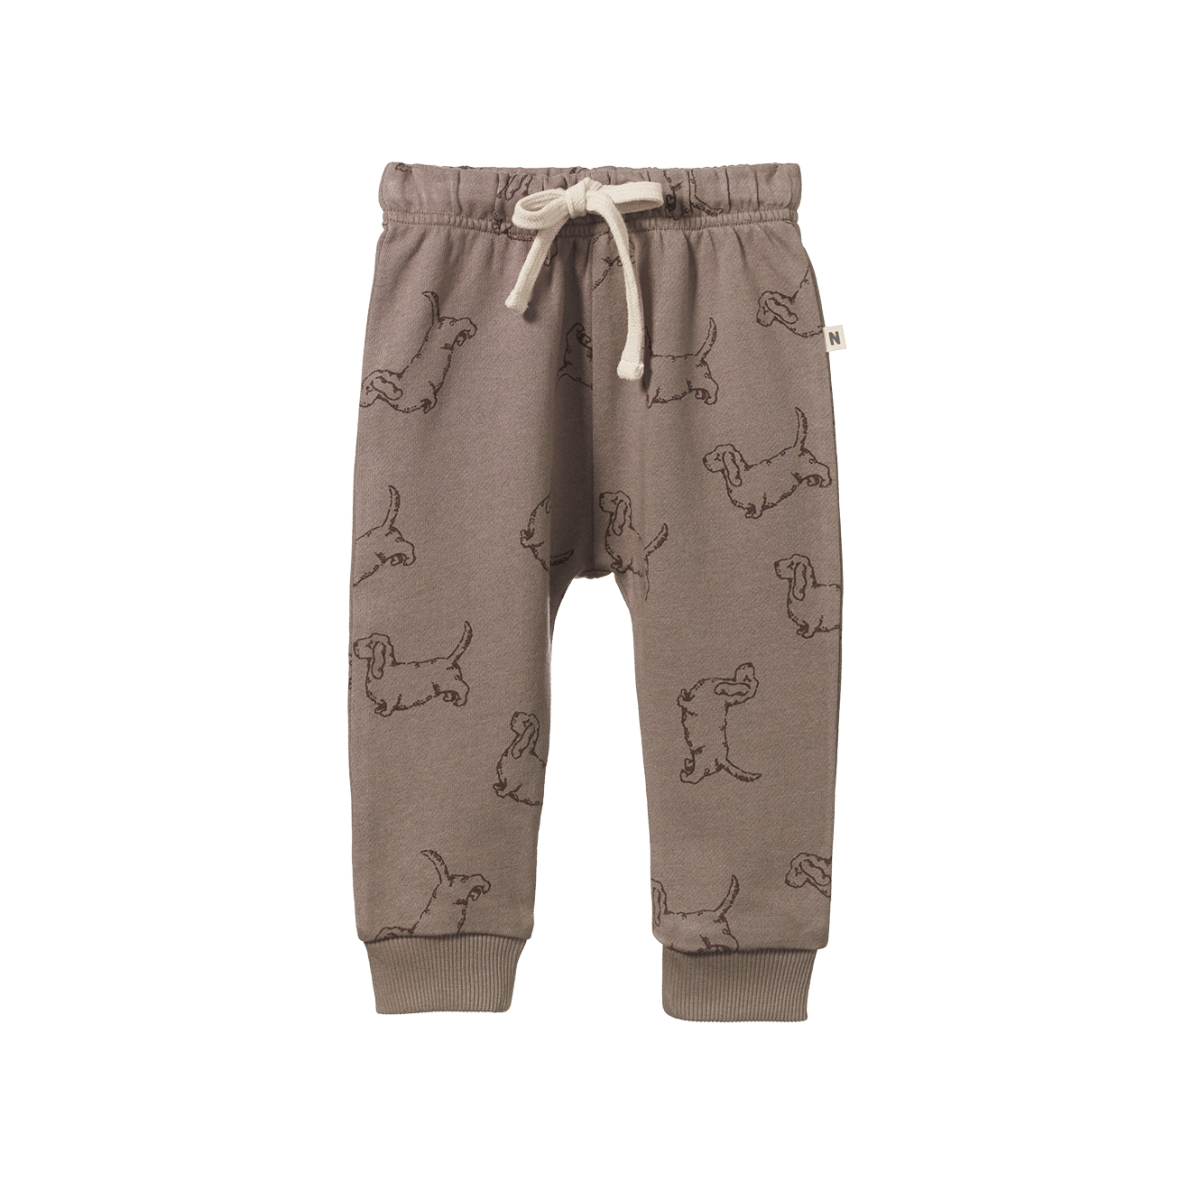 Sunday track pants - HAPPY HOUNDS PRINT | Nature Baby